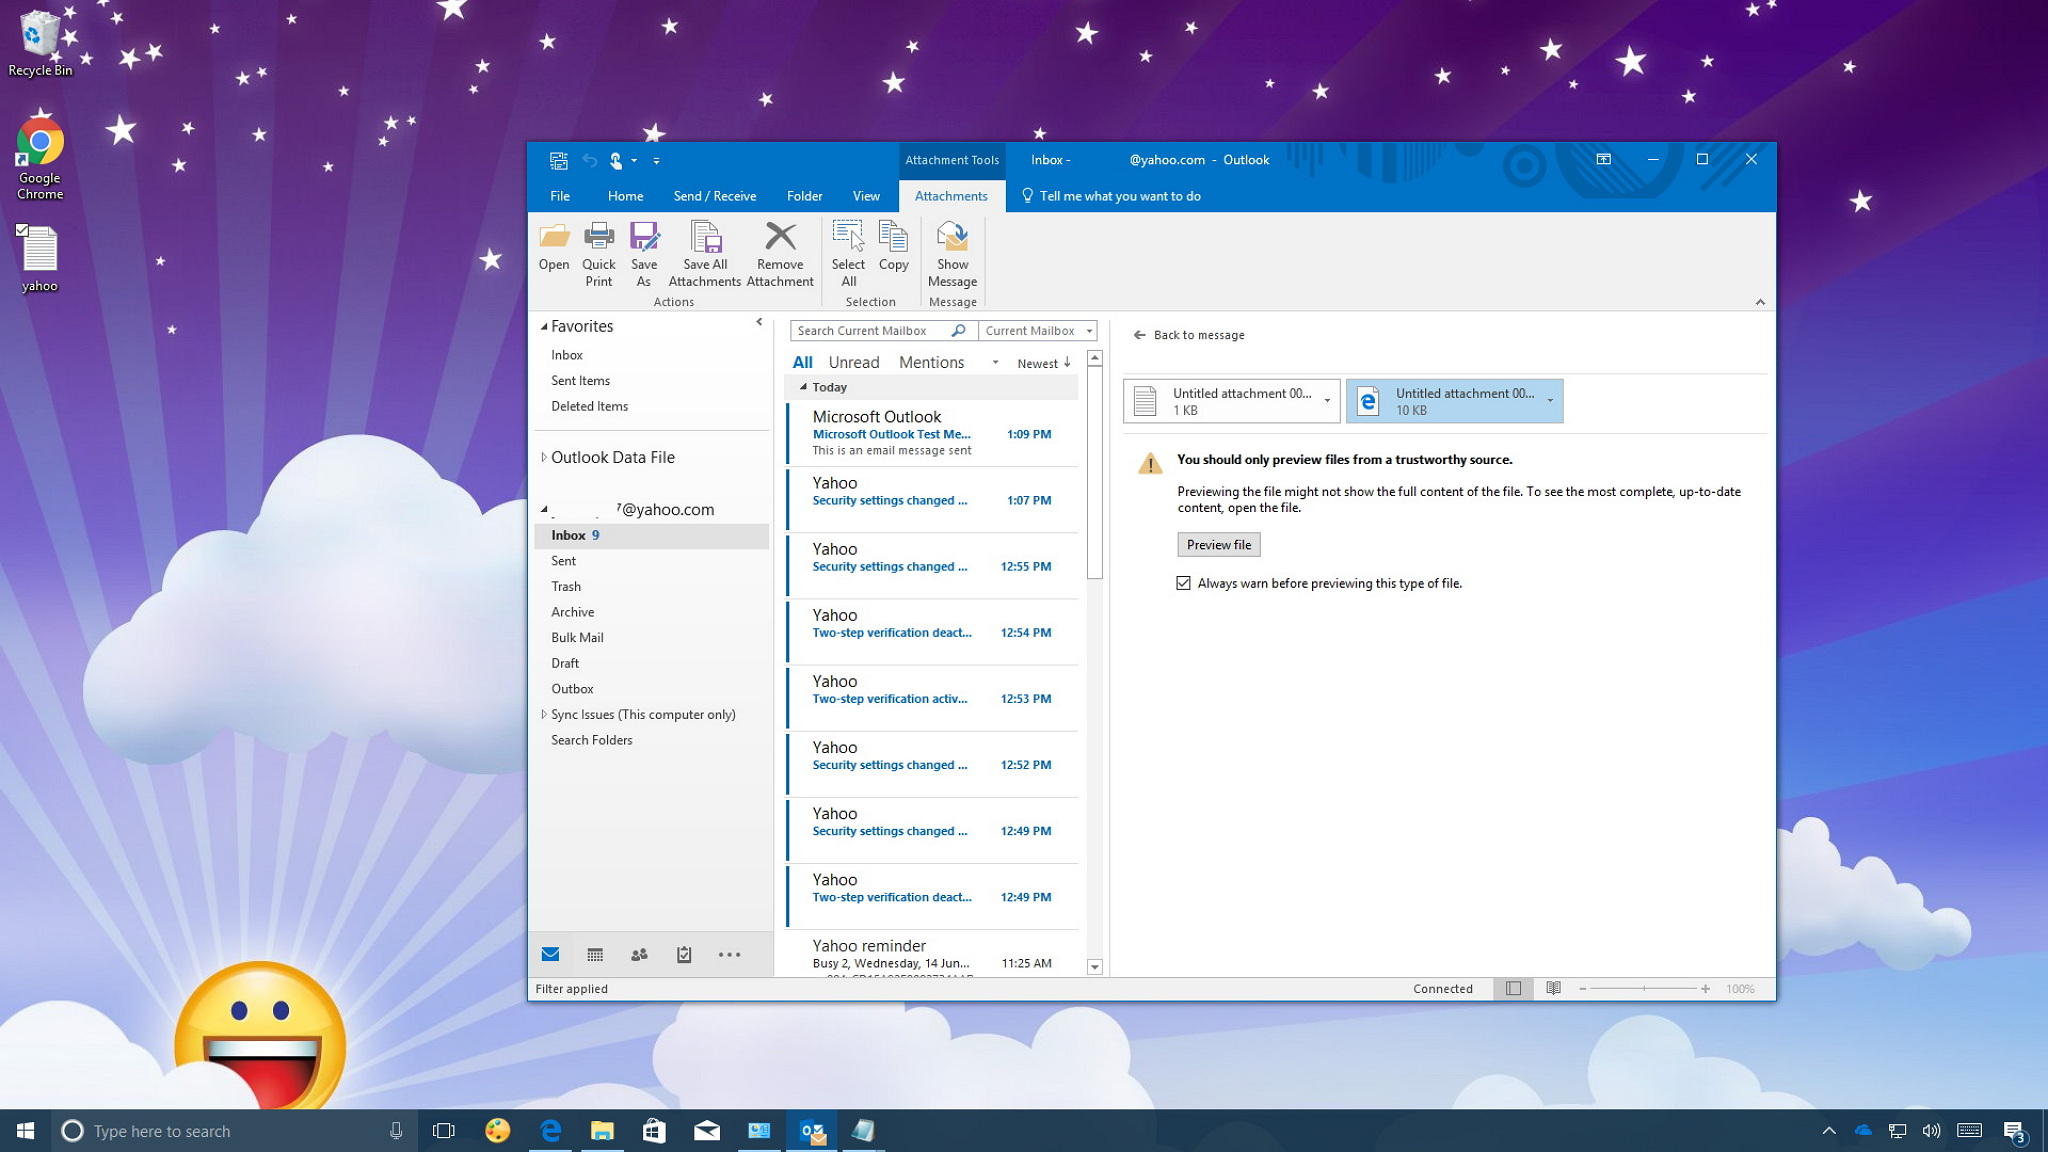 Use Filters to See Only Important Mail in Yahoo Mail